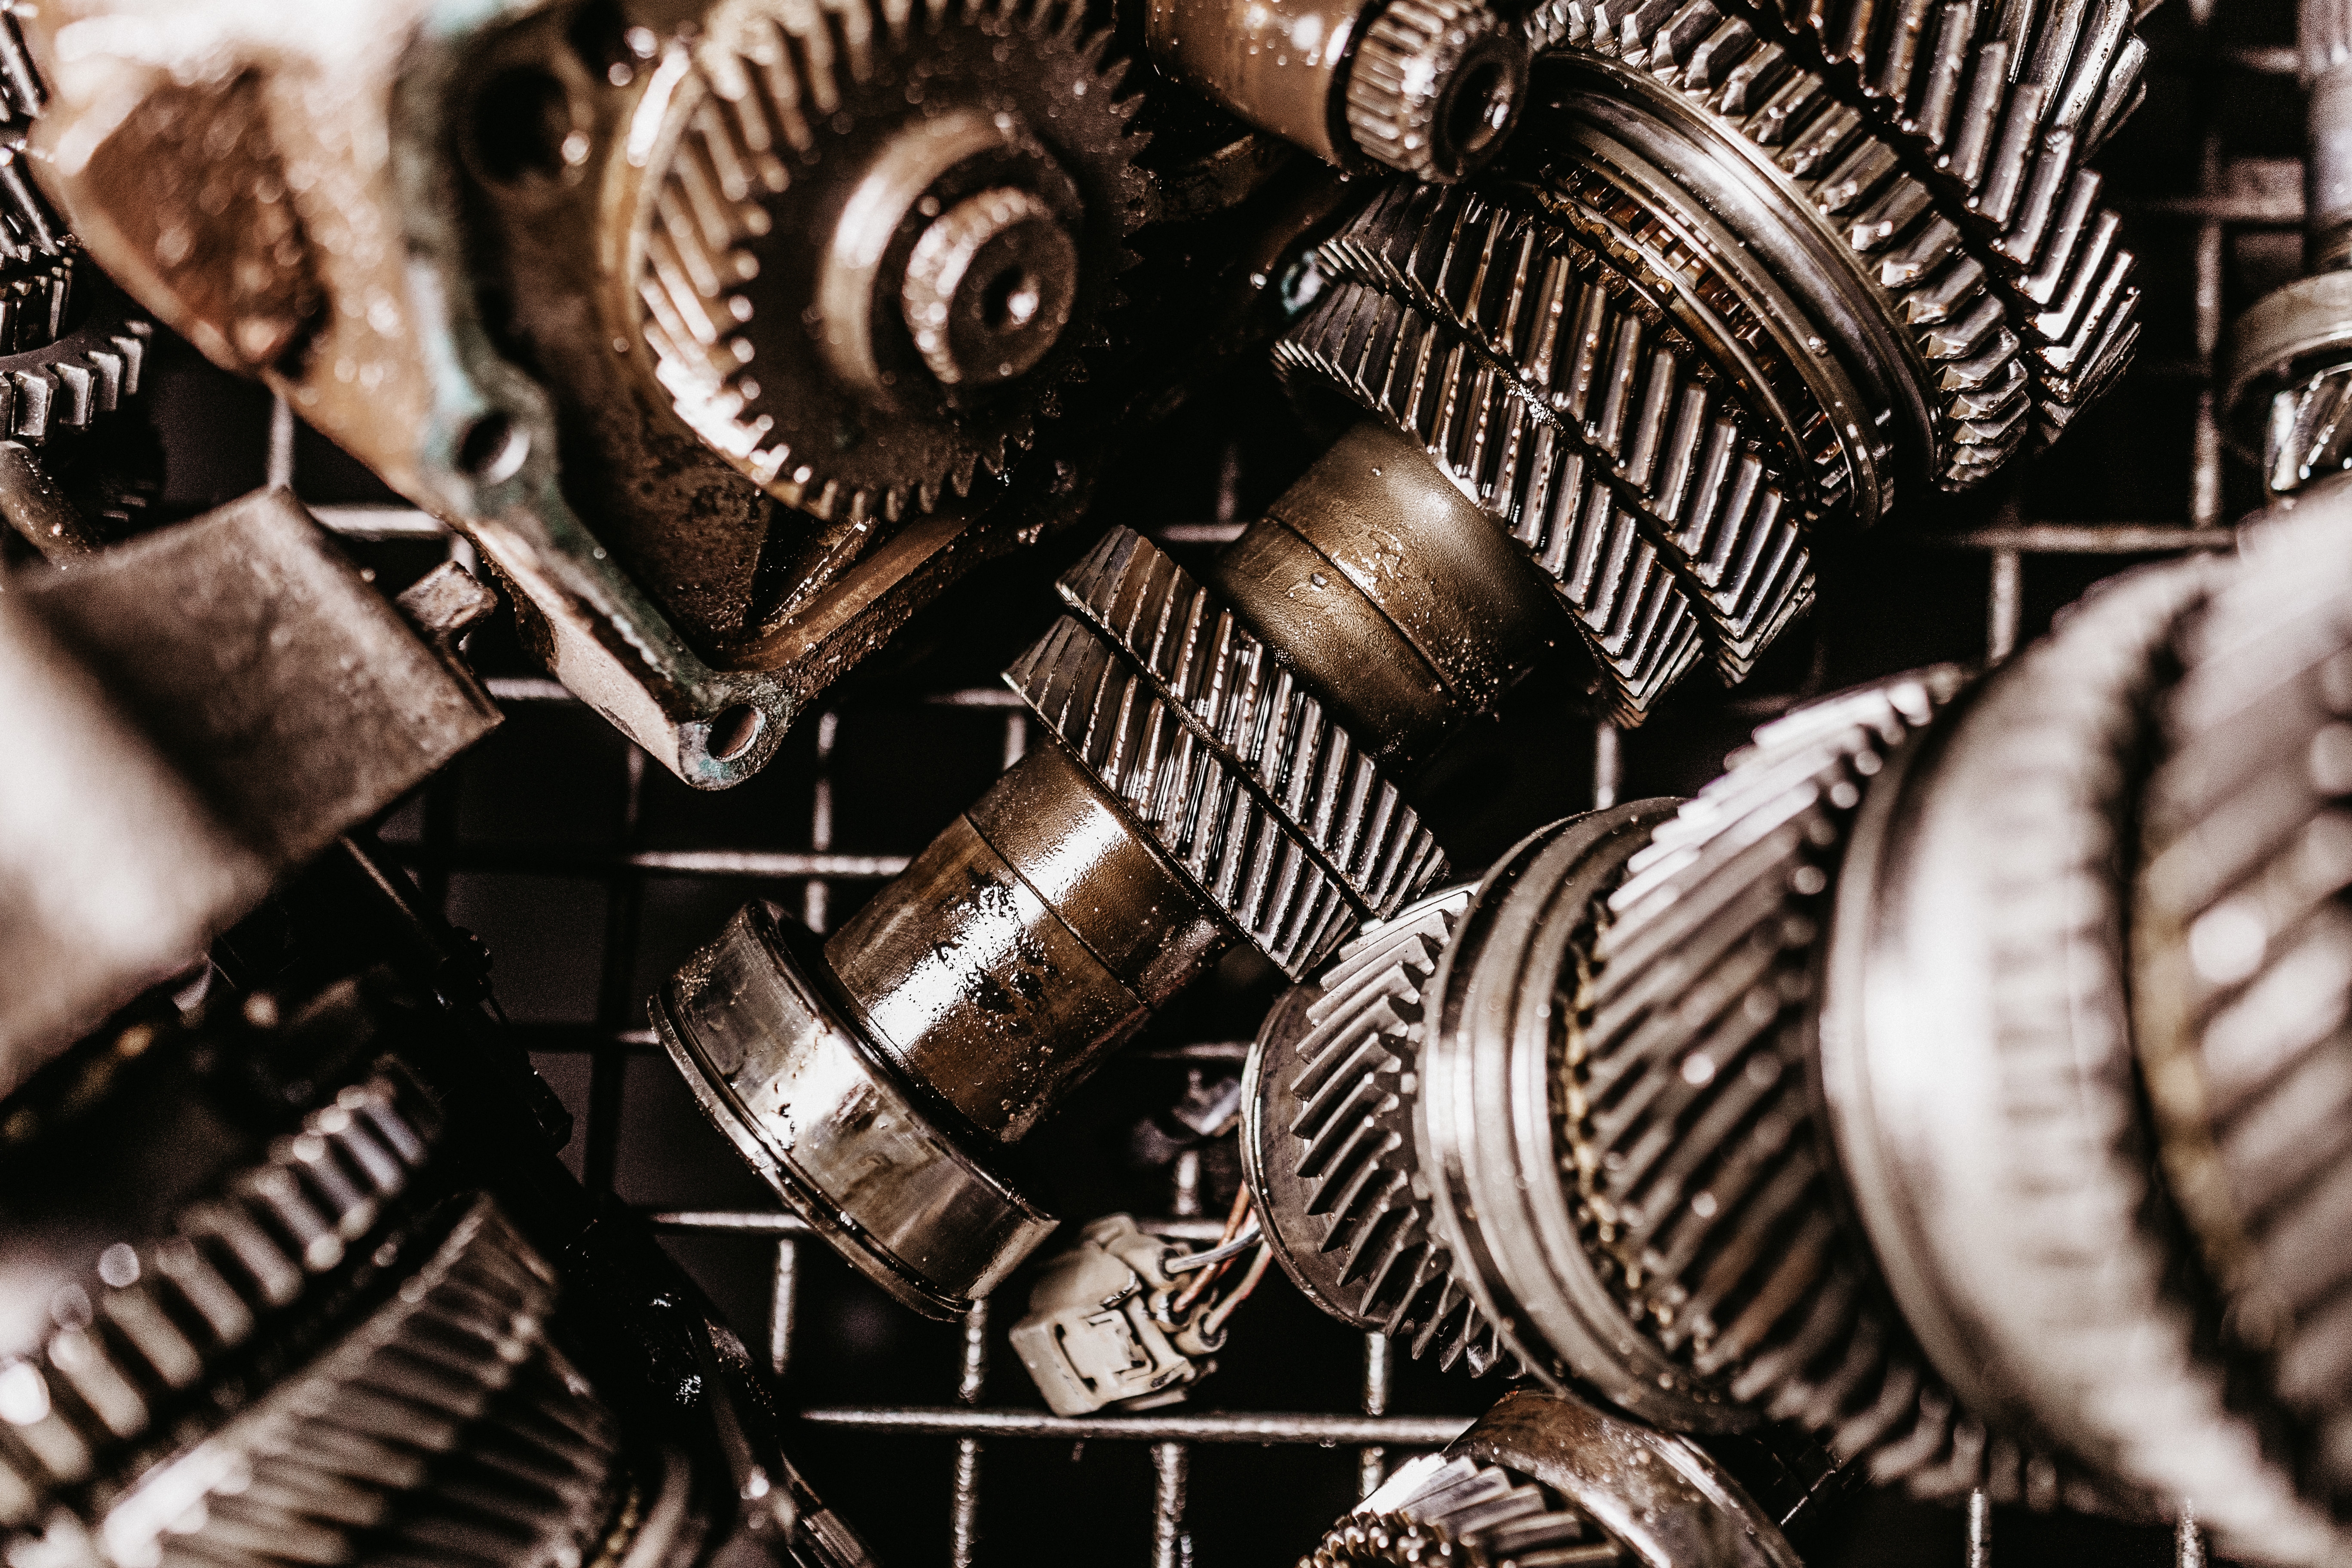 Methods of gearbox cooling and maintenance